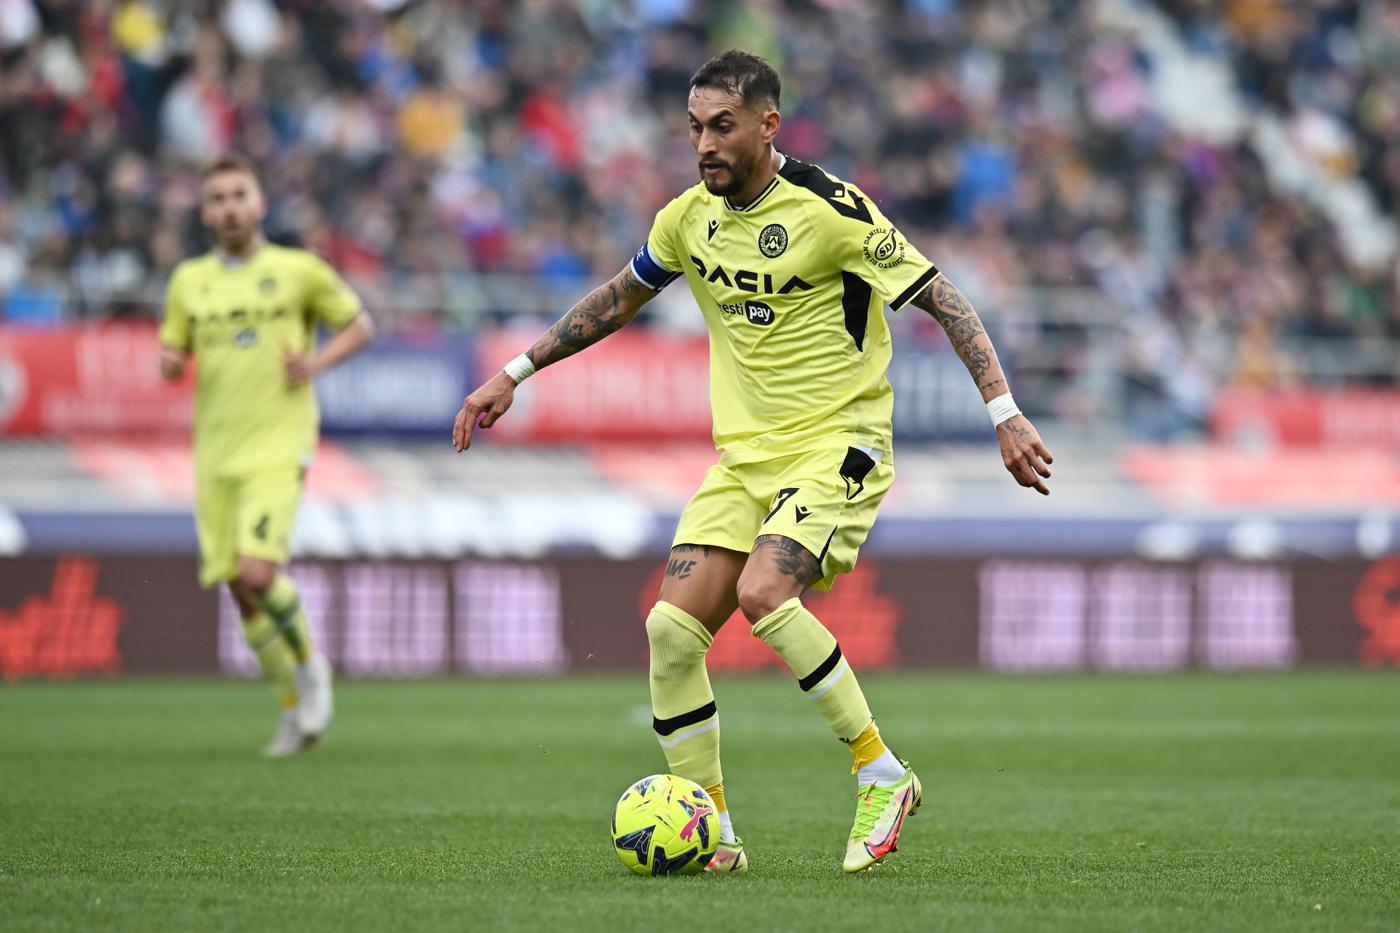 Bologna - Udinese - 3:0. Italian Championship, 28th round. Match review, statistics